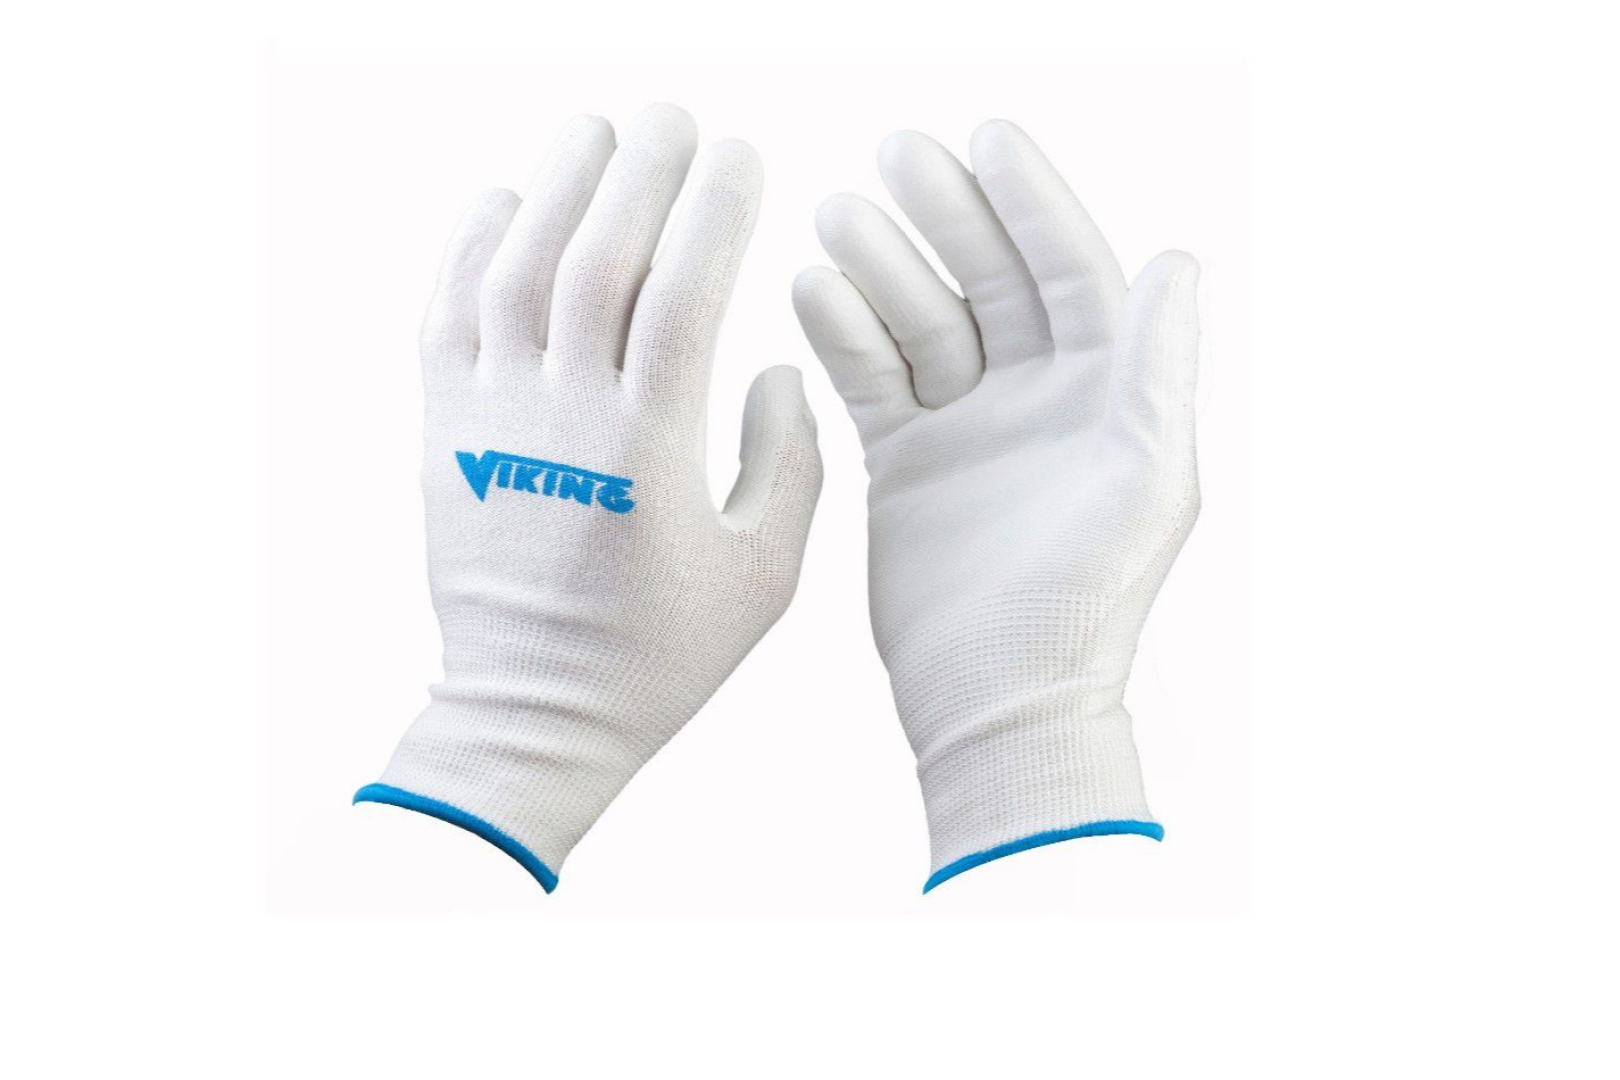 Viking Competition Protective Gloves